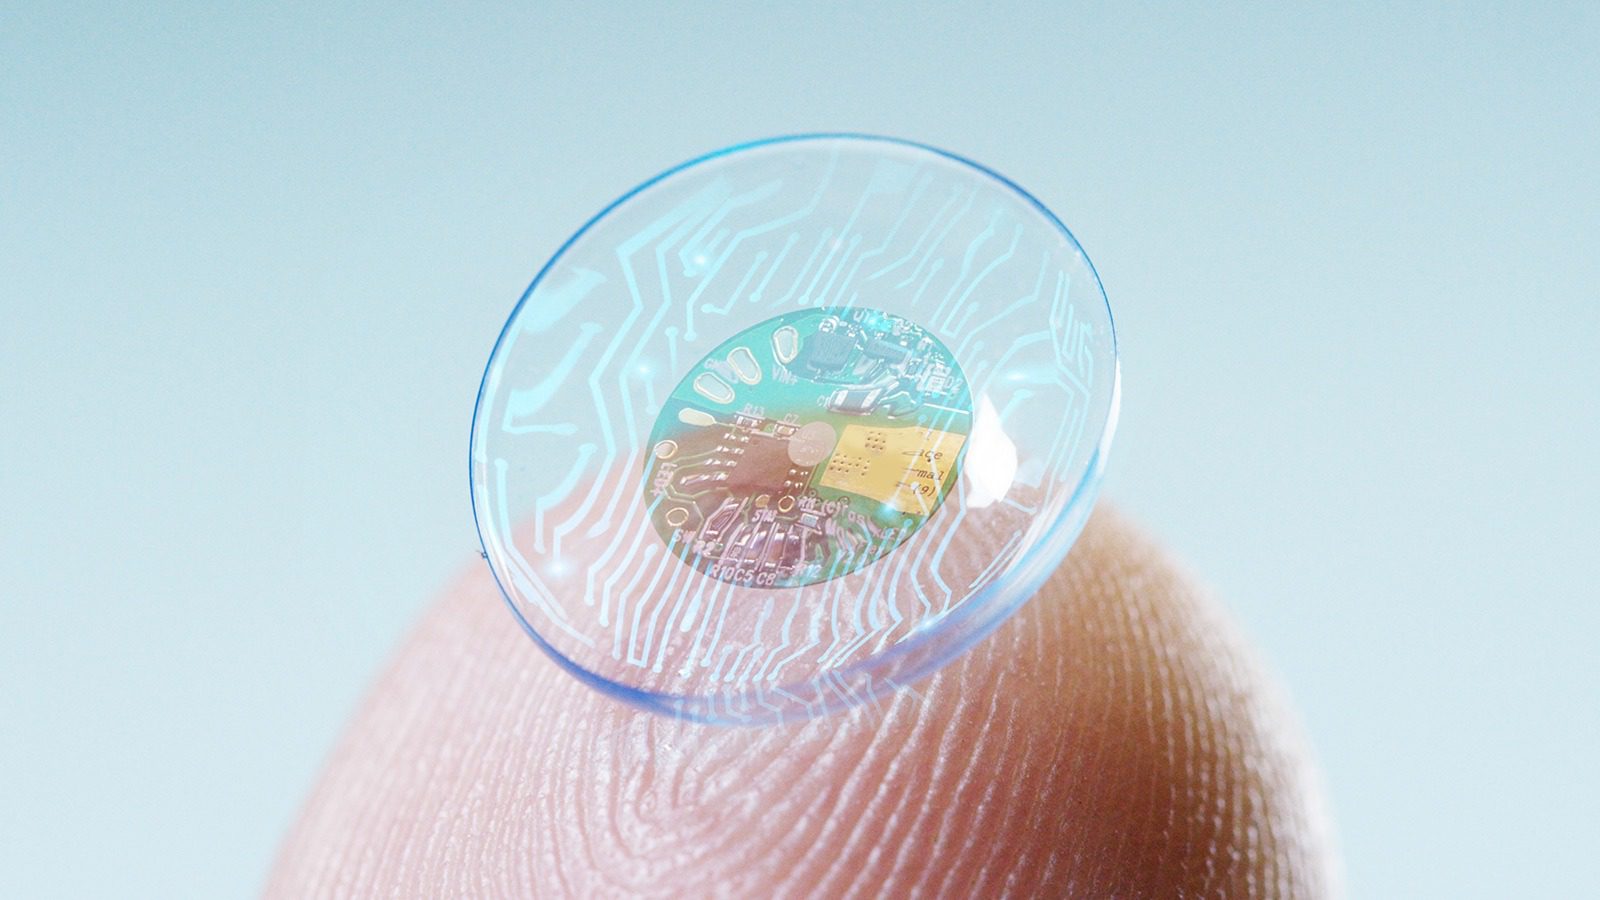 High-tech contact lenses are straight out of science fiction — and may replace smart phones